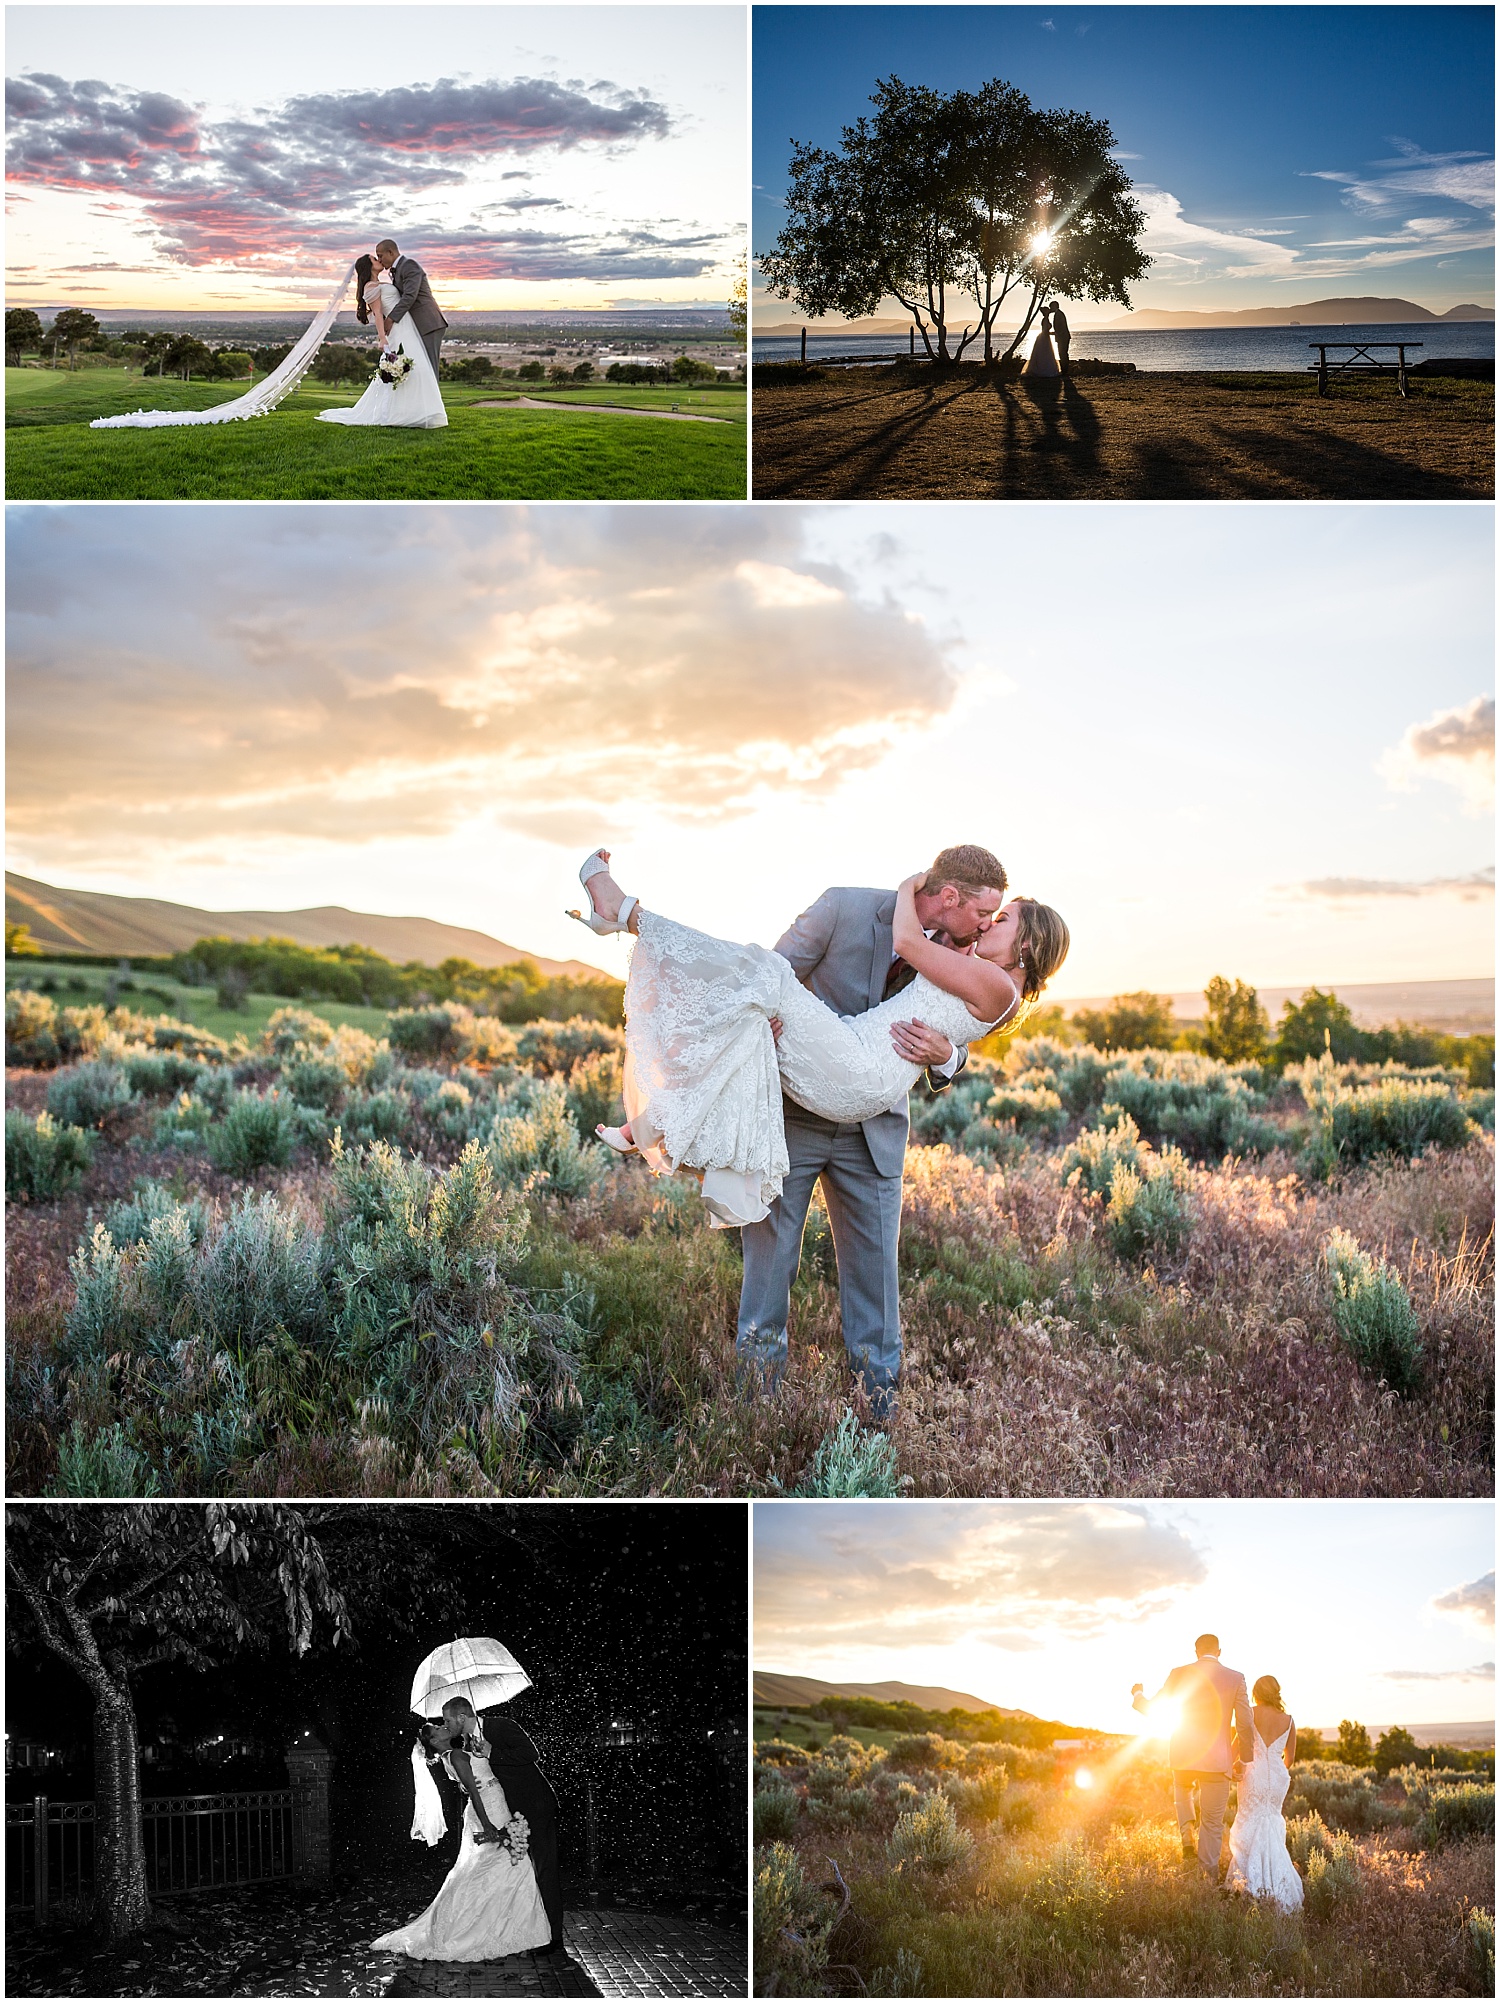 Tips for planning your wedding day timeline: sunset portraits for the bride and groom.